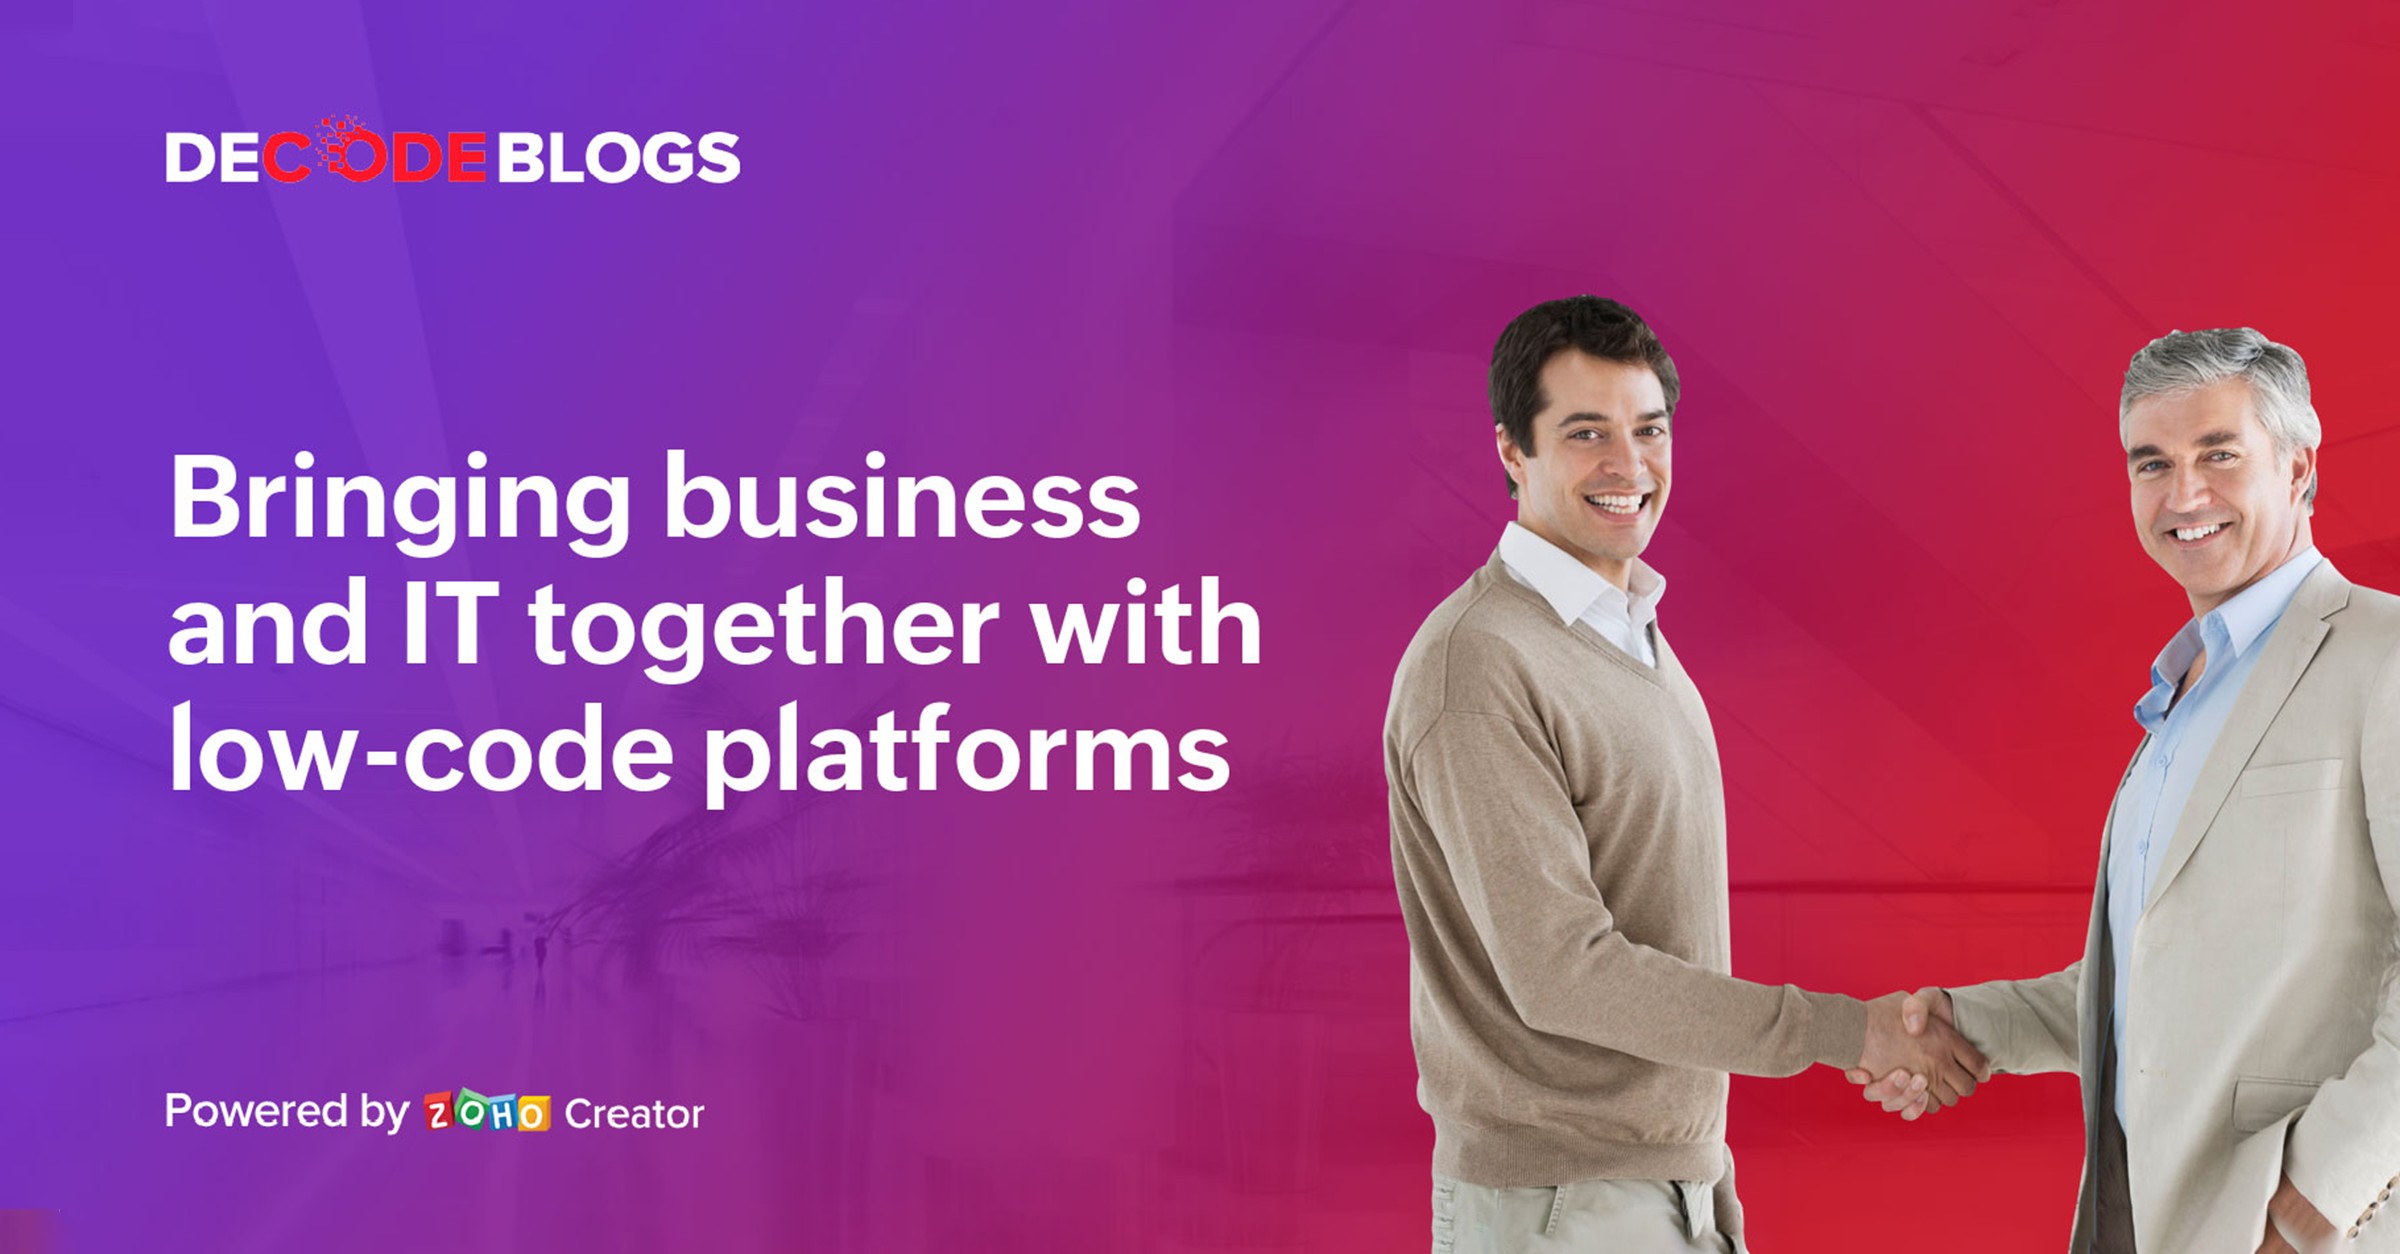 Bringing business and IT together with low-code platforms